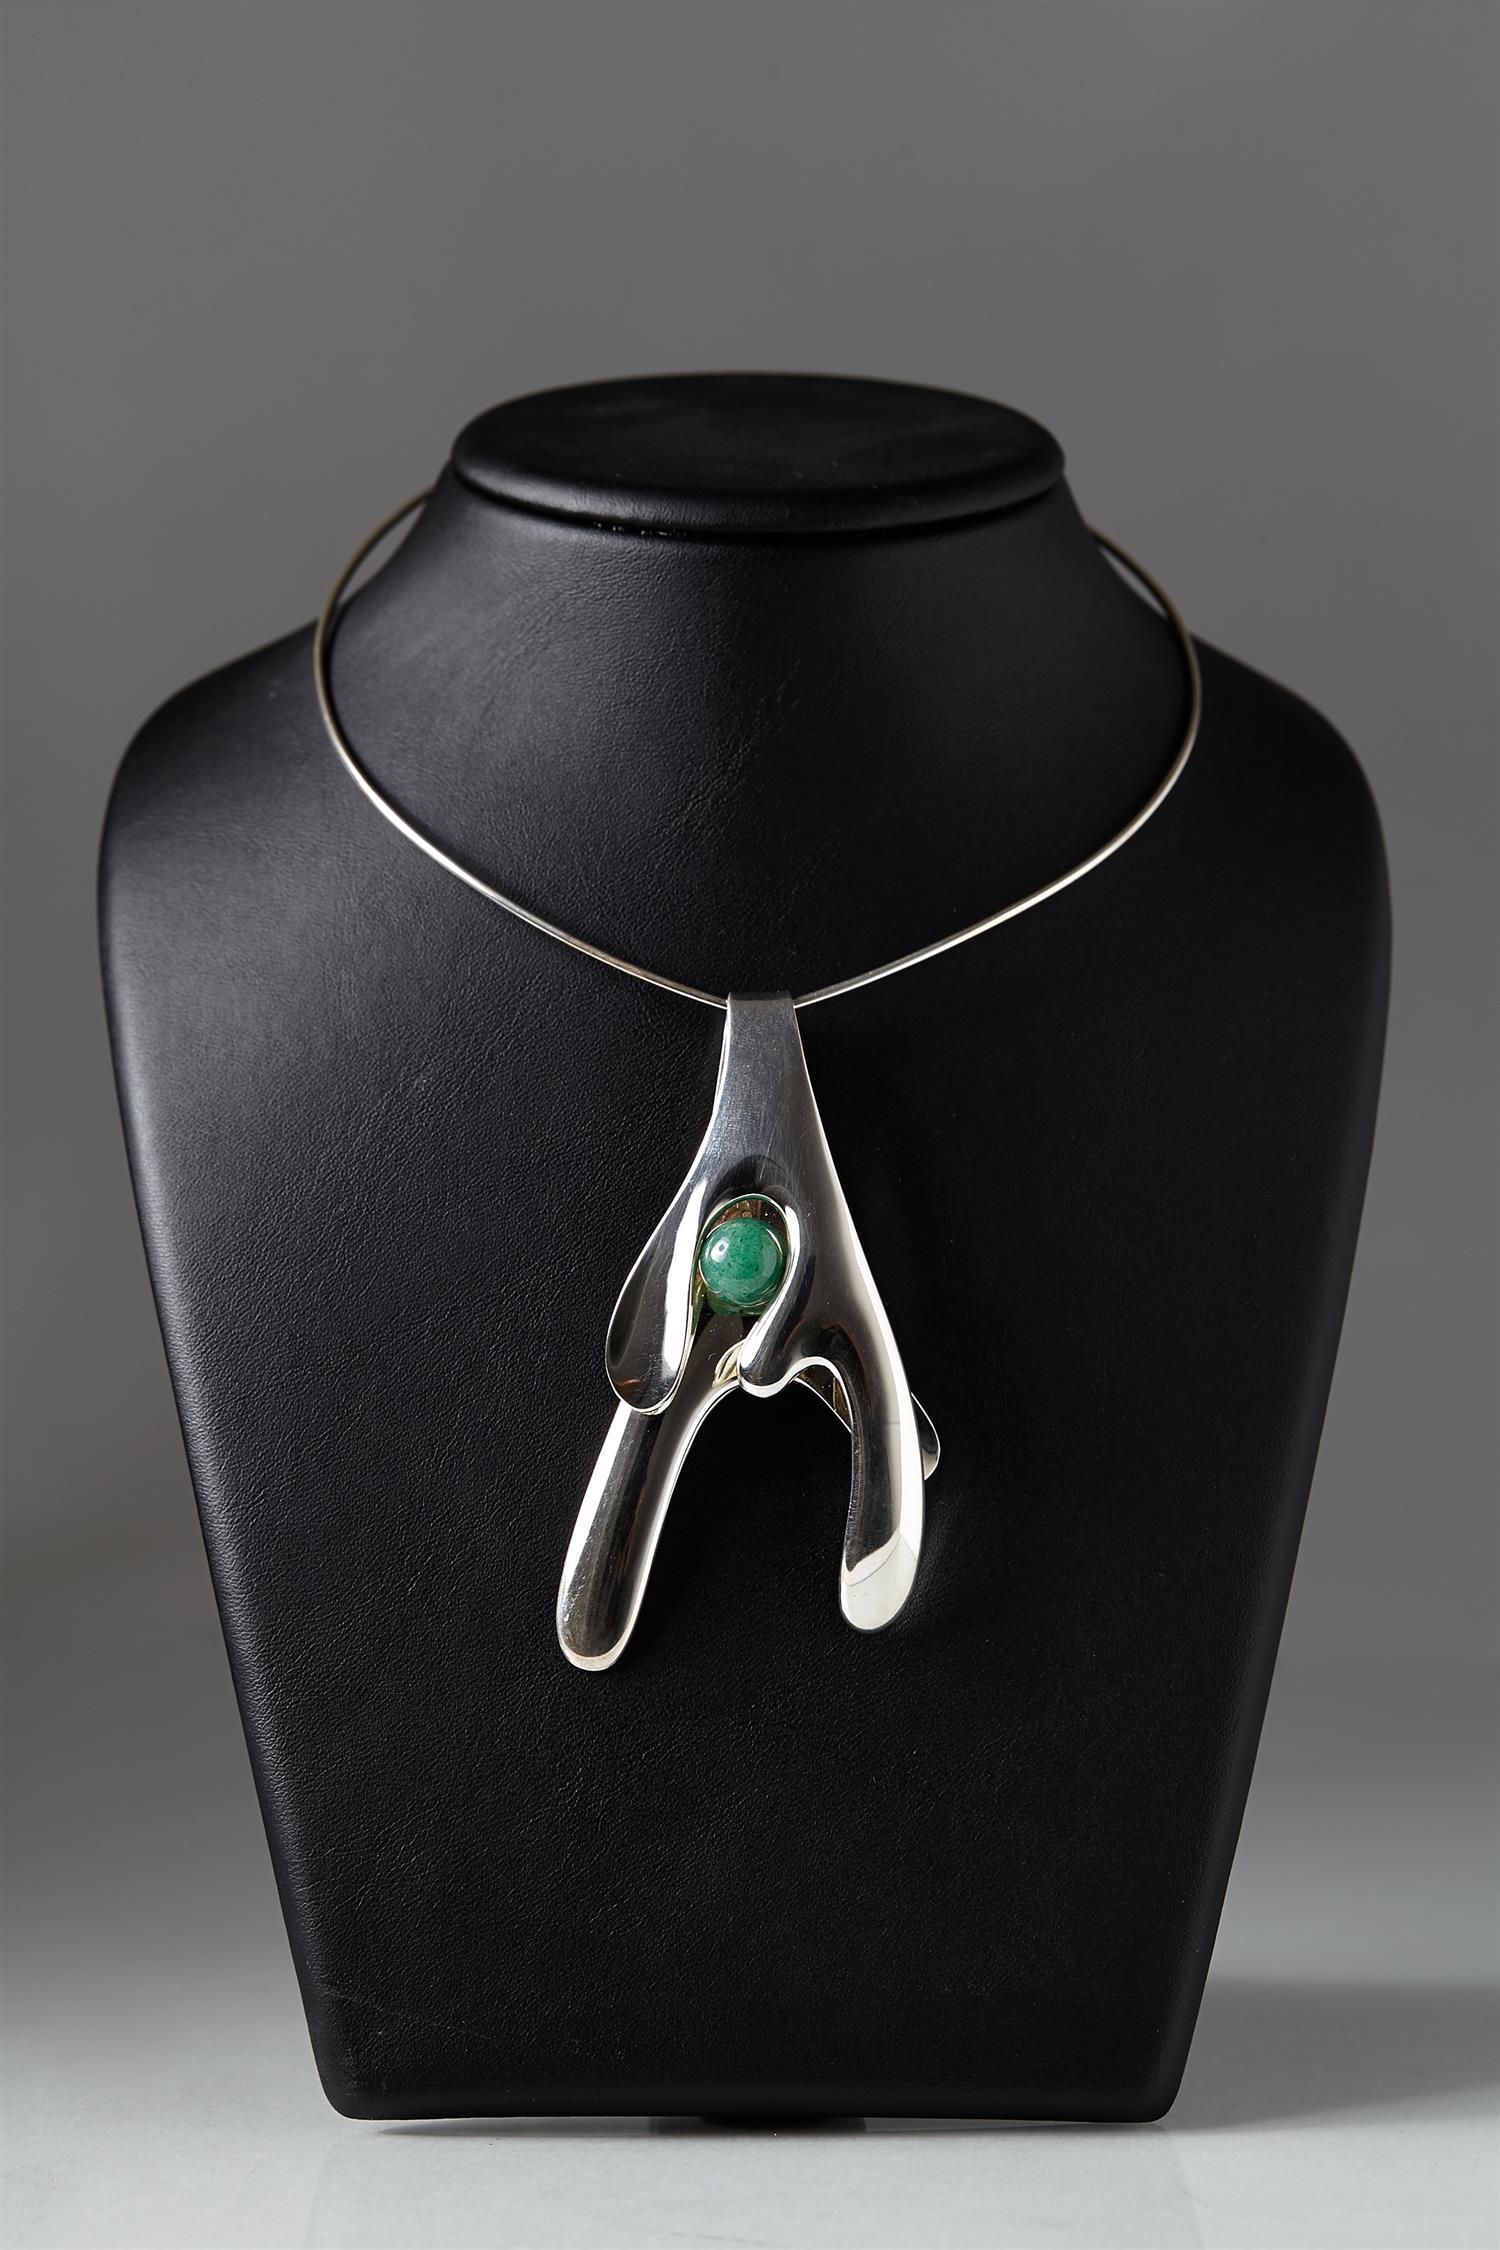 Sterling silver and chrysophrase.

Lenght of pendant: 8,5 cm/ 3 1/4''
